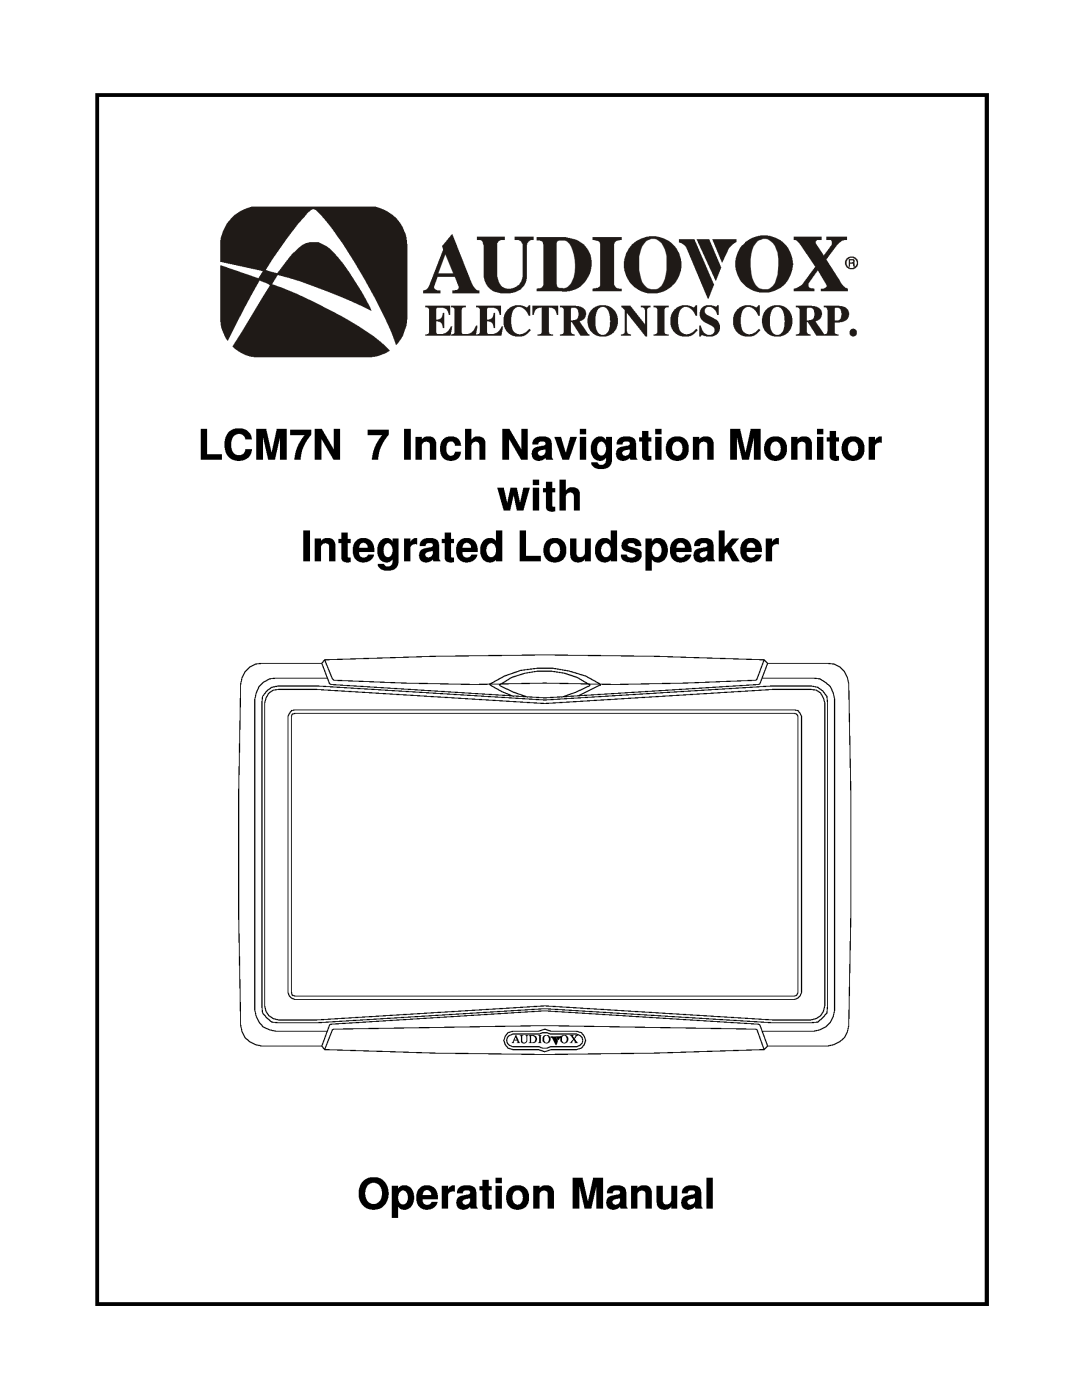 Audiovox operation manual Electronics Corp, LCM7N 7 Inch Navigation Monitor with Integrated Loudspeaker, Audioox 